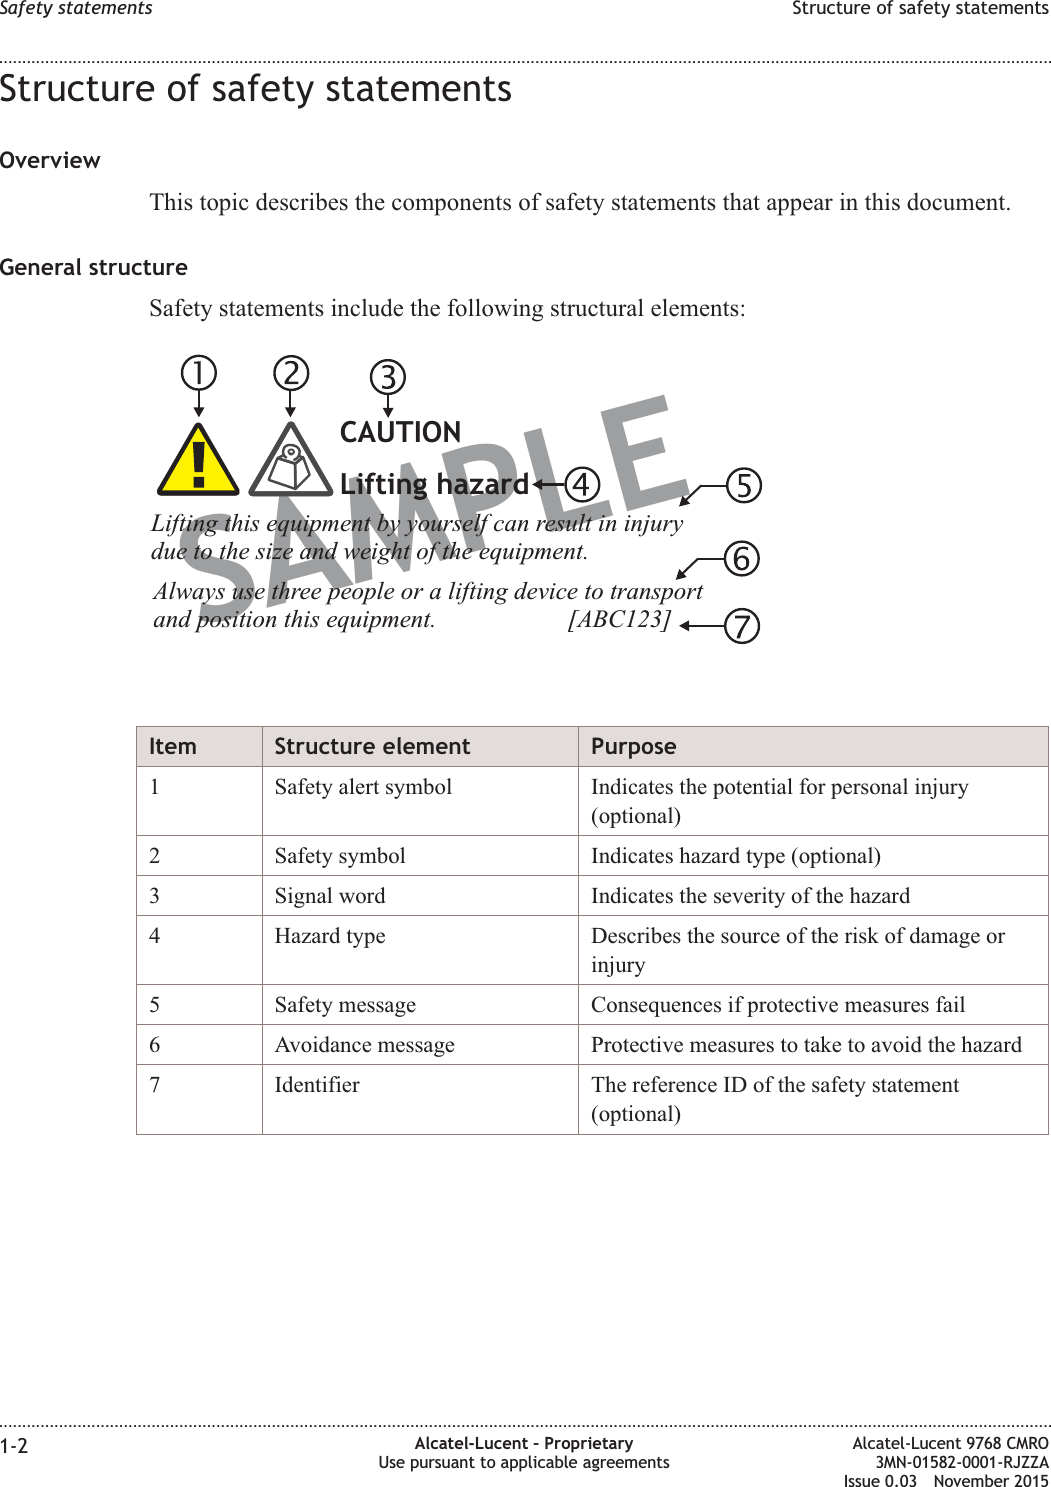 Structure of safety statementsOverviewThis topic describes the components of safety statements that appear in this document.General structureSafety statements include the following structural elements:Item Structure element Purpose1 Safety alert symbol Indicates the potential for personal injury(optional)2 Safety symbol Indicates hazard type (optional)3 Signal word Indicates the severity of the hazard4 Hazard type Describes the source of the risk of damage orinjury5 Safety message Consequences if protective measures fail6 Avoidance message Protective measures to take to avoid the hazard7 Identifier The reference ID of the safety statement(optional)SAMPLELifting this equipment by yourself can result in injurydue to the size and weight of the equipment.Always use three people or a lifting device to transportand position this equipment. [ABC123]CAUTIONLifting hazardSafety statements Structure of safety statements........................................................................................................................................................................................................................................................................................................................................................................................................................................................................1-2 Alcatel-Lucent – ProprietaryUse pursuant to applicable agreementsAlcatel-Lucent 9768 CMRO3MN-01582-0001-RJZZAIssue 0.03 November 2015DRAFTDRAFT